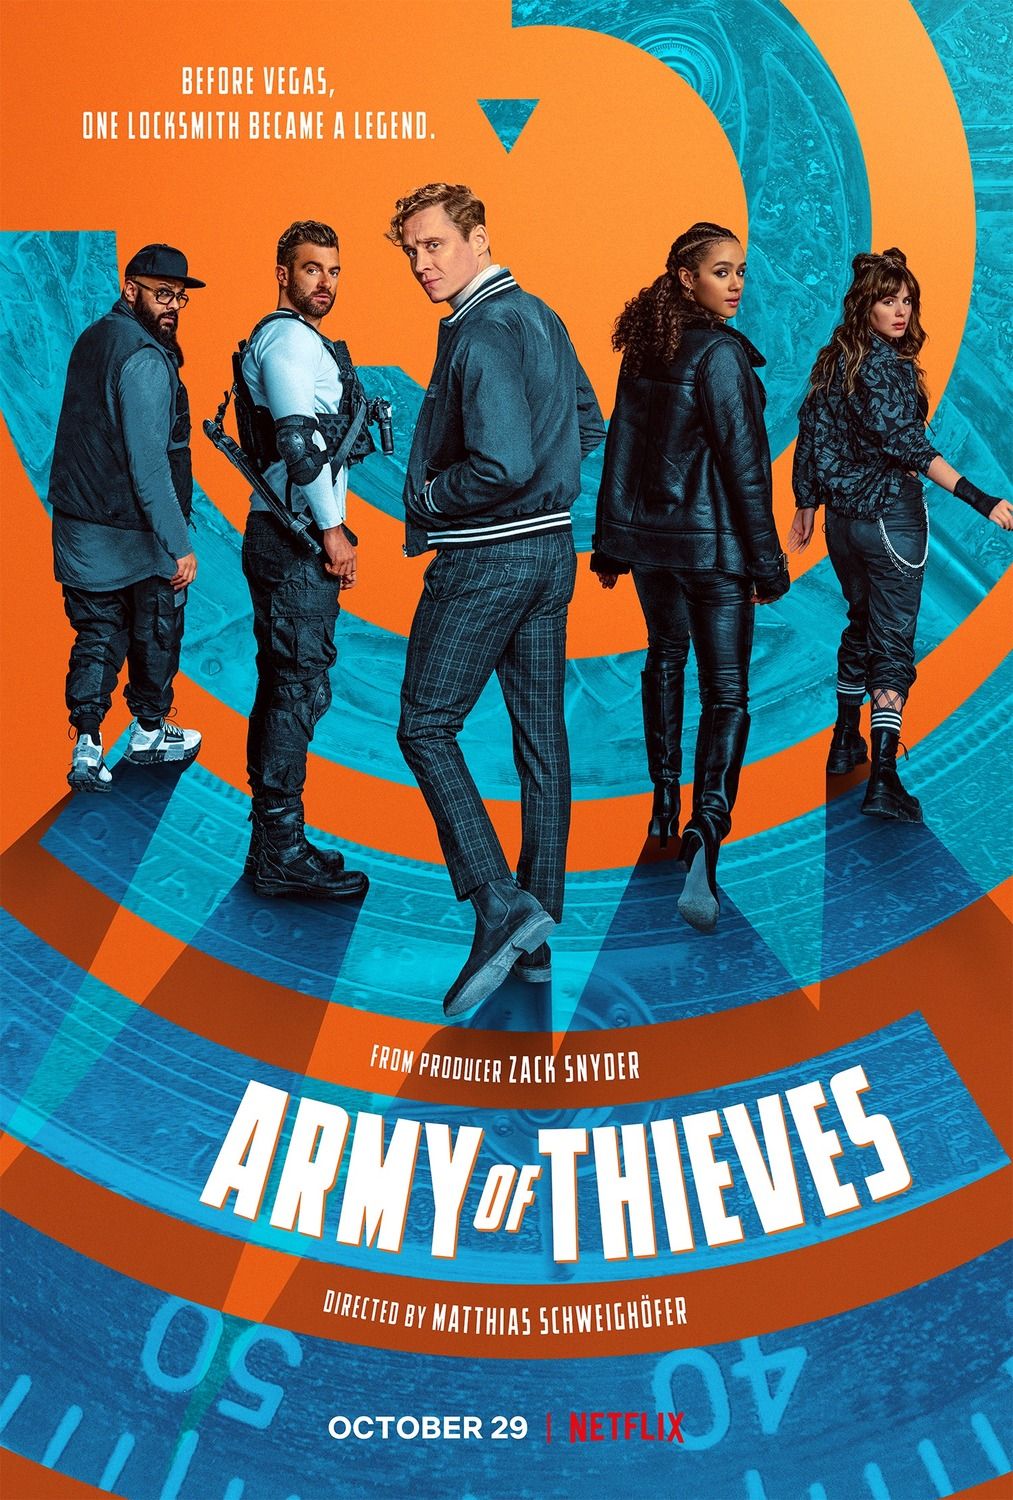 Army of Thieves (2021) Hindi Dubbed Full Movie